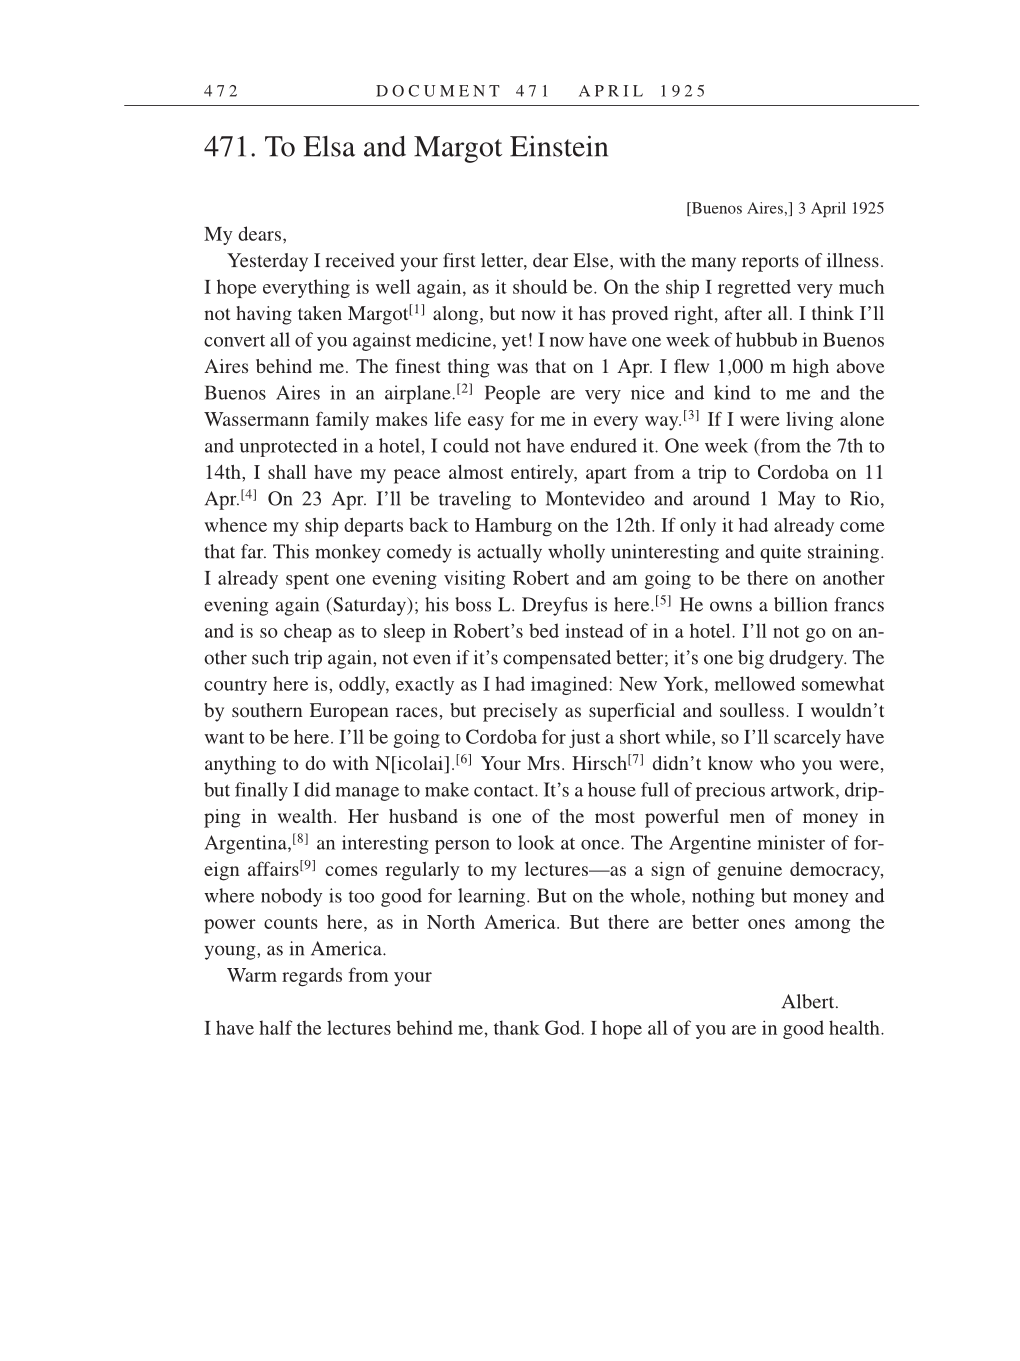 Volume 14: The Berlin Years: Writings & Correspondence, April 1923-May 1925 (English Translation Supplement) page 472